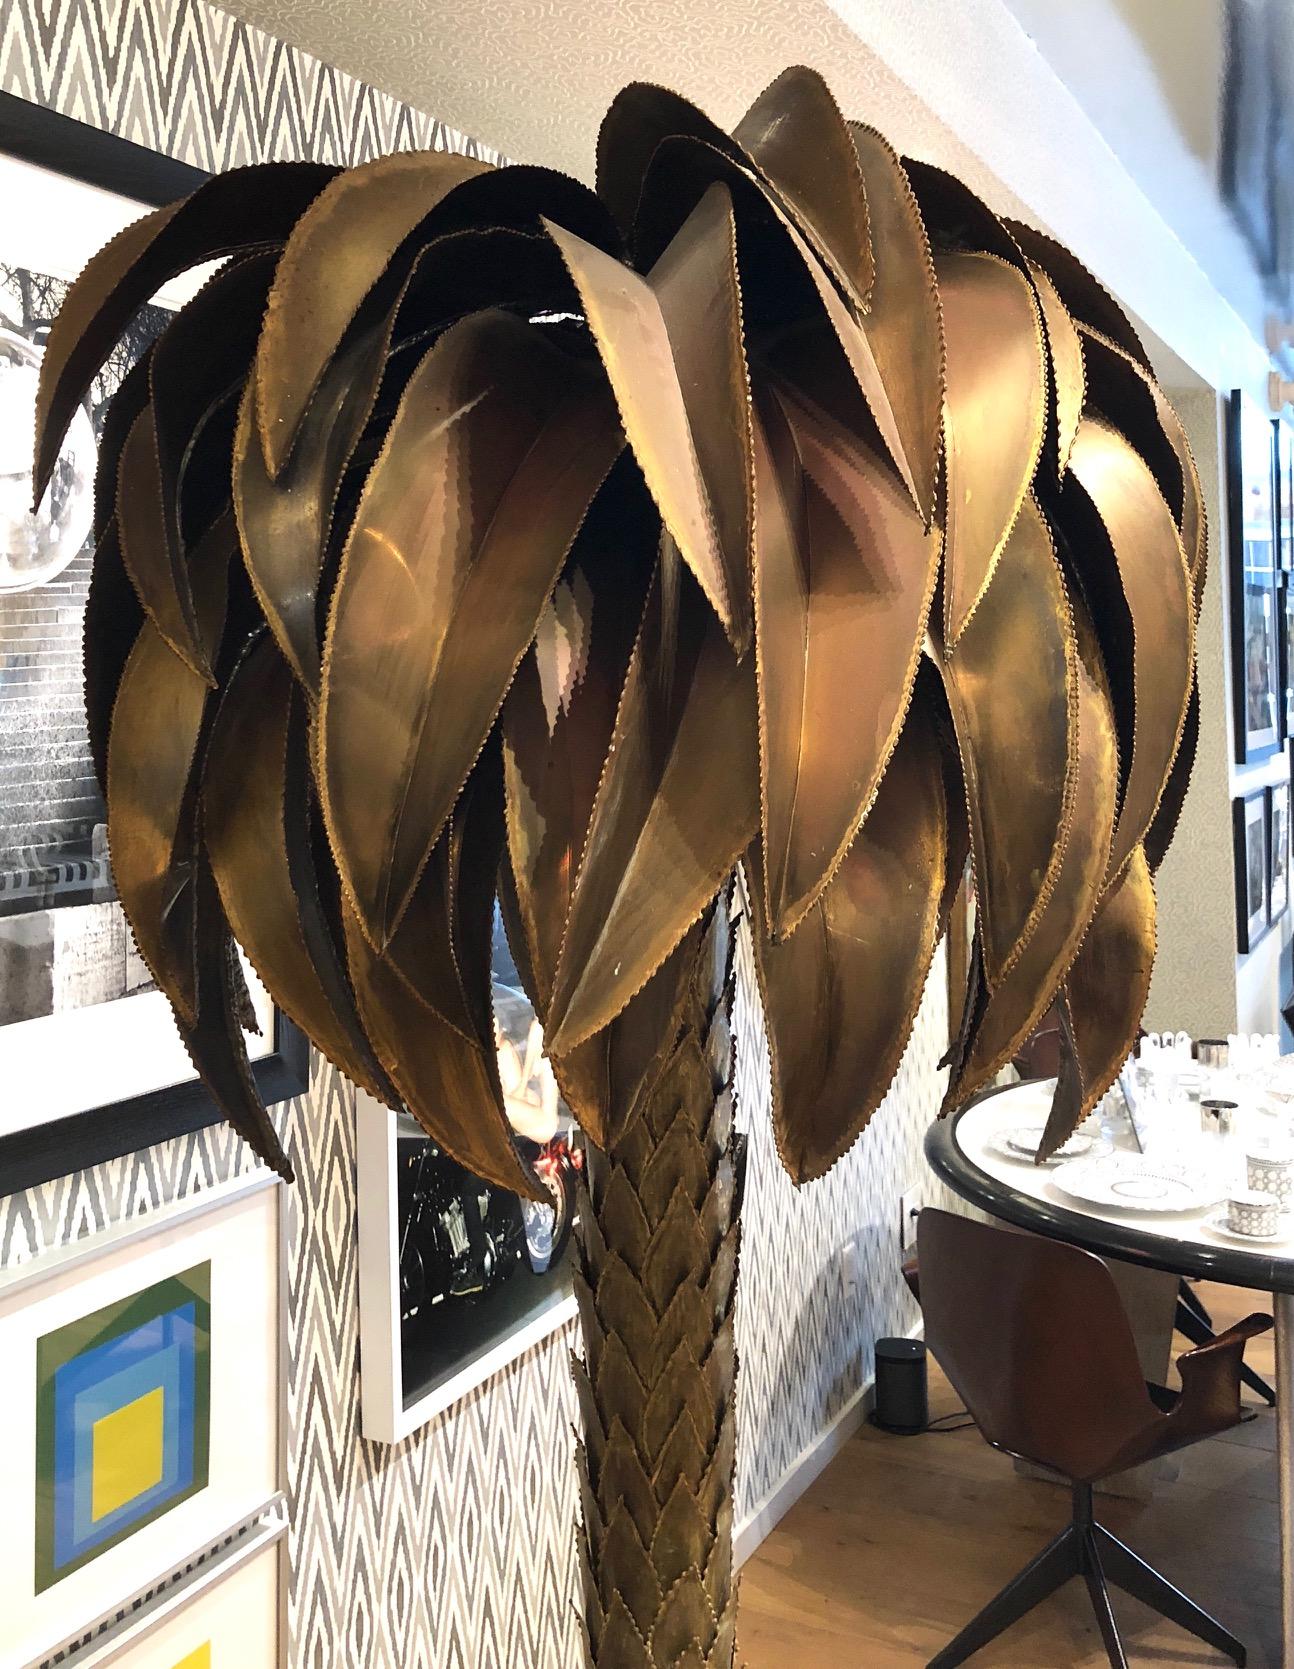 Tall brass palm tree floor lamp by Maison Jansen, Paris circa 1960s. 5 lights, one on top and 4 inside the palm leaves. Palm lamp in worked brass, base in black lacquer 16